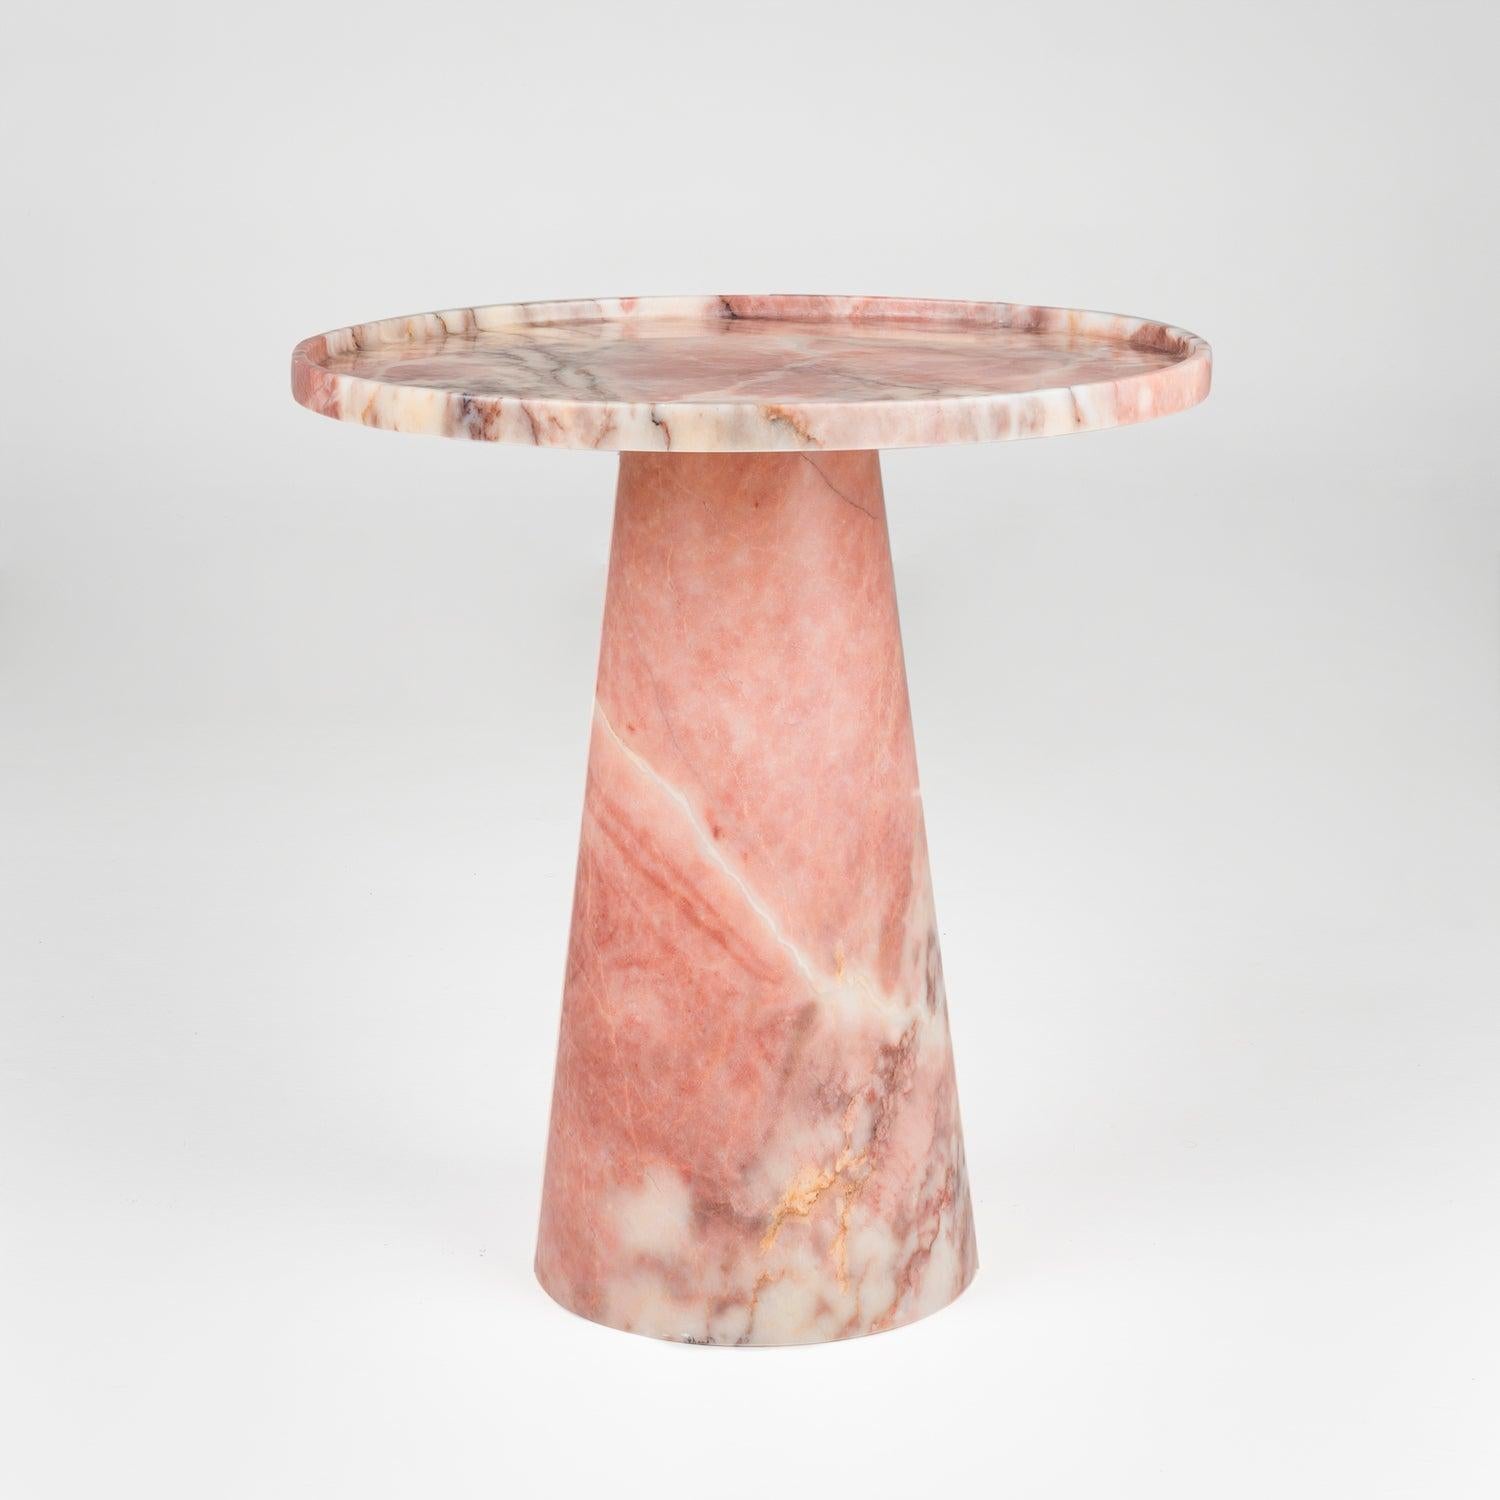 Pink Marble Pedestal Side Table made from marble with unique veining

Stunning, aesthetic, timeless are words that can be used to describe this elegant and modern side table from Kiwano. Expertly crafted and finished by hand, our pink marble side